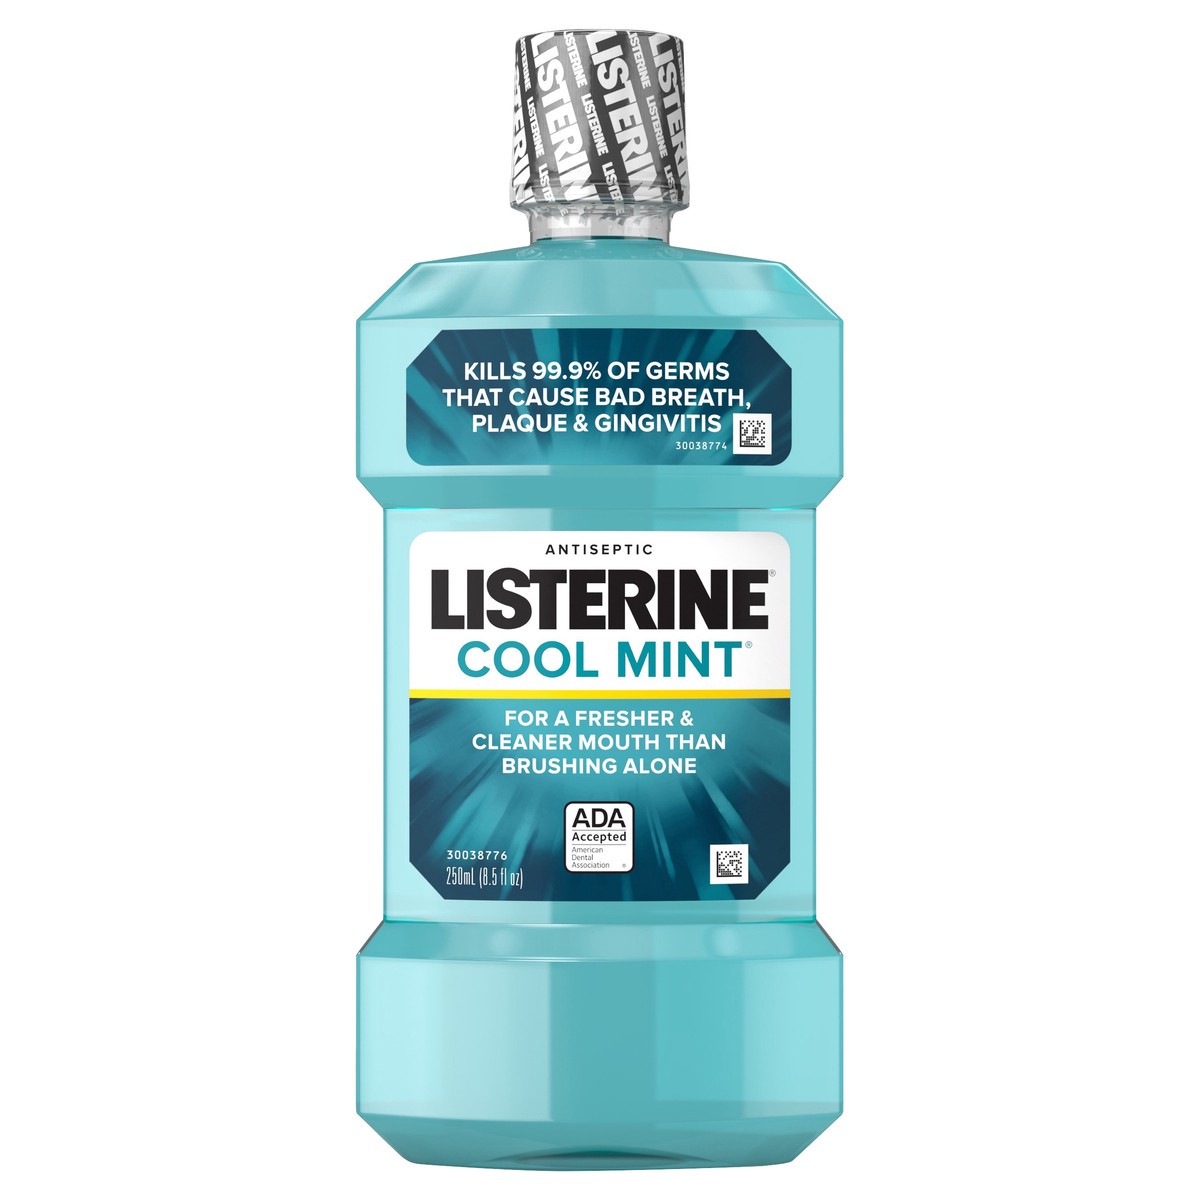 slide 5 of 8, Listerine Cool Mint Antiseptic Mouthwash, Daily Oral Rinse Kills 99% of Germs that Cause Bad Breath, Plaque and Gingivitis for a Fresher, Cleaner Mouth, Cool Mint Flavor, 250 mL/ 8.5 Fl. Oz., 250 ml